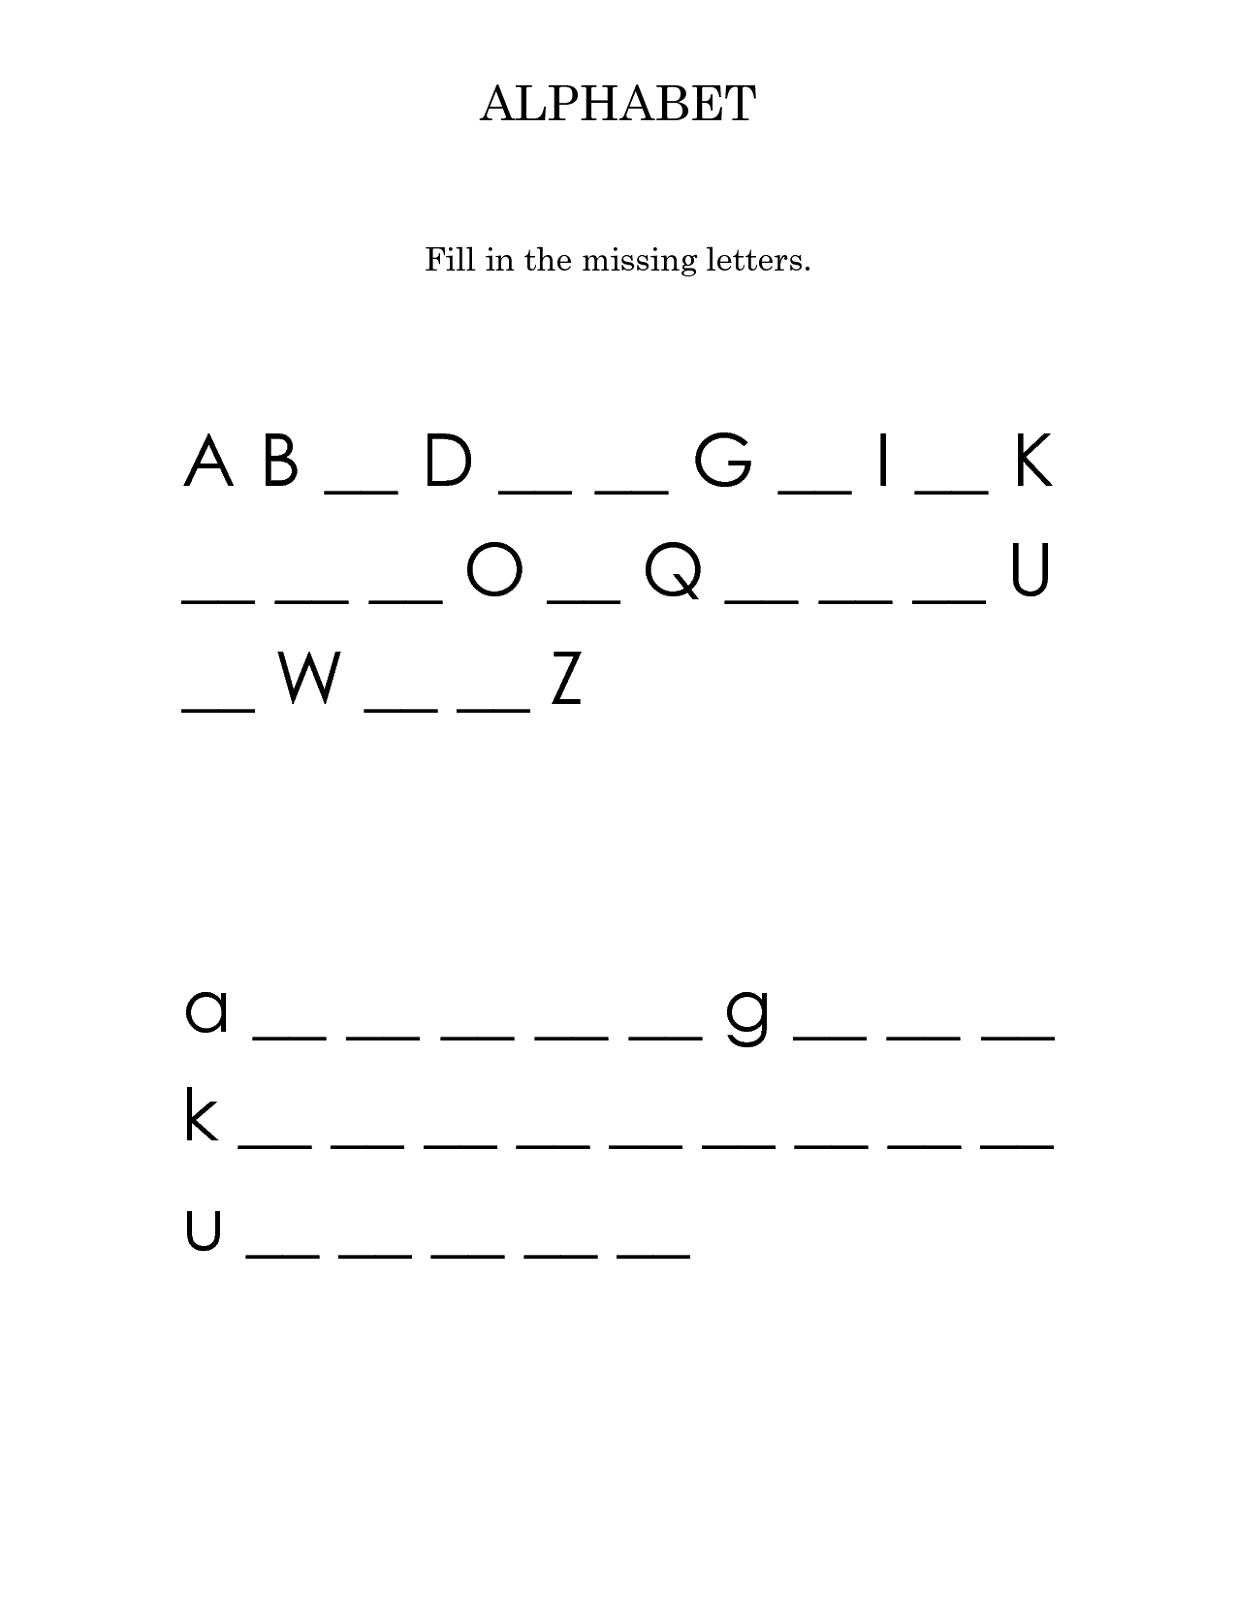 4-capital-and-small-alphabets-worksheets-free-printable-alphabet-98c